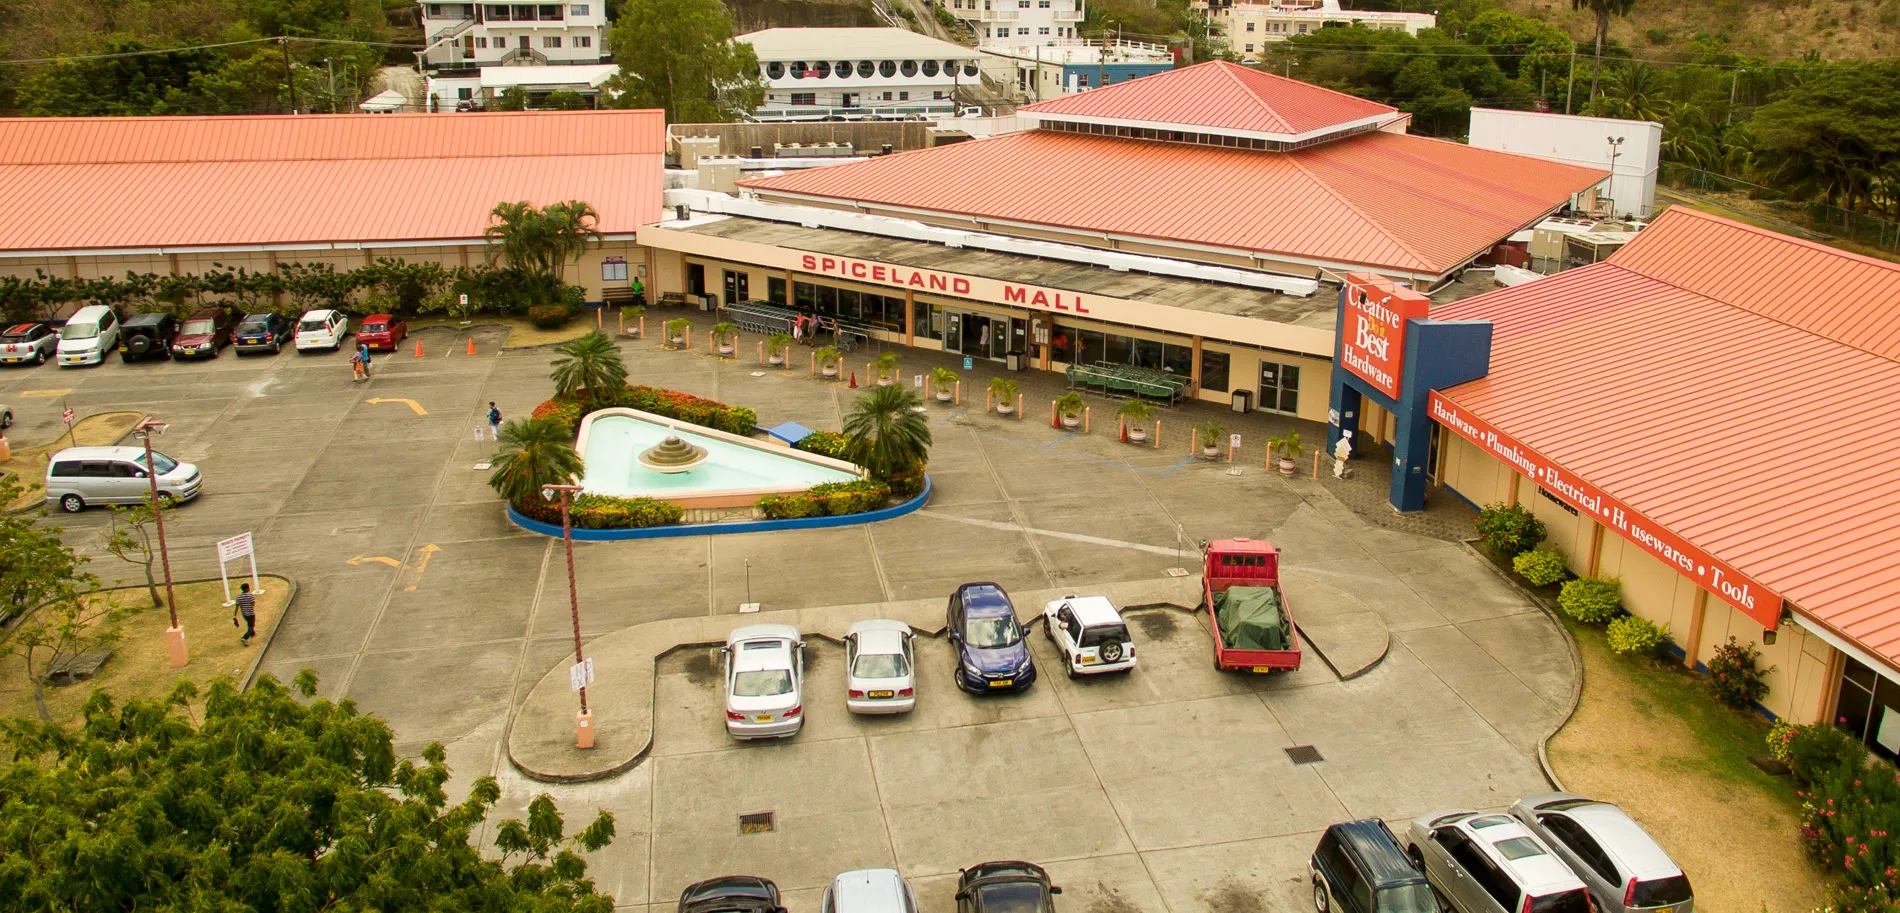 Spiceland Mall in Grenada, caribbean | Handbags,Shoes,Clothes,Gifts,Cosmetics,Sportswear - Country Helper